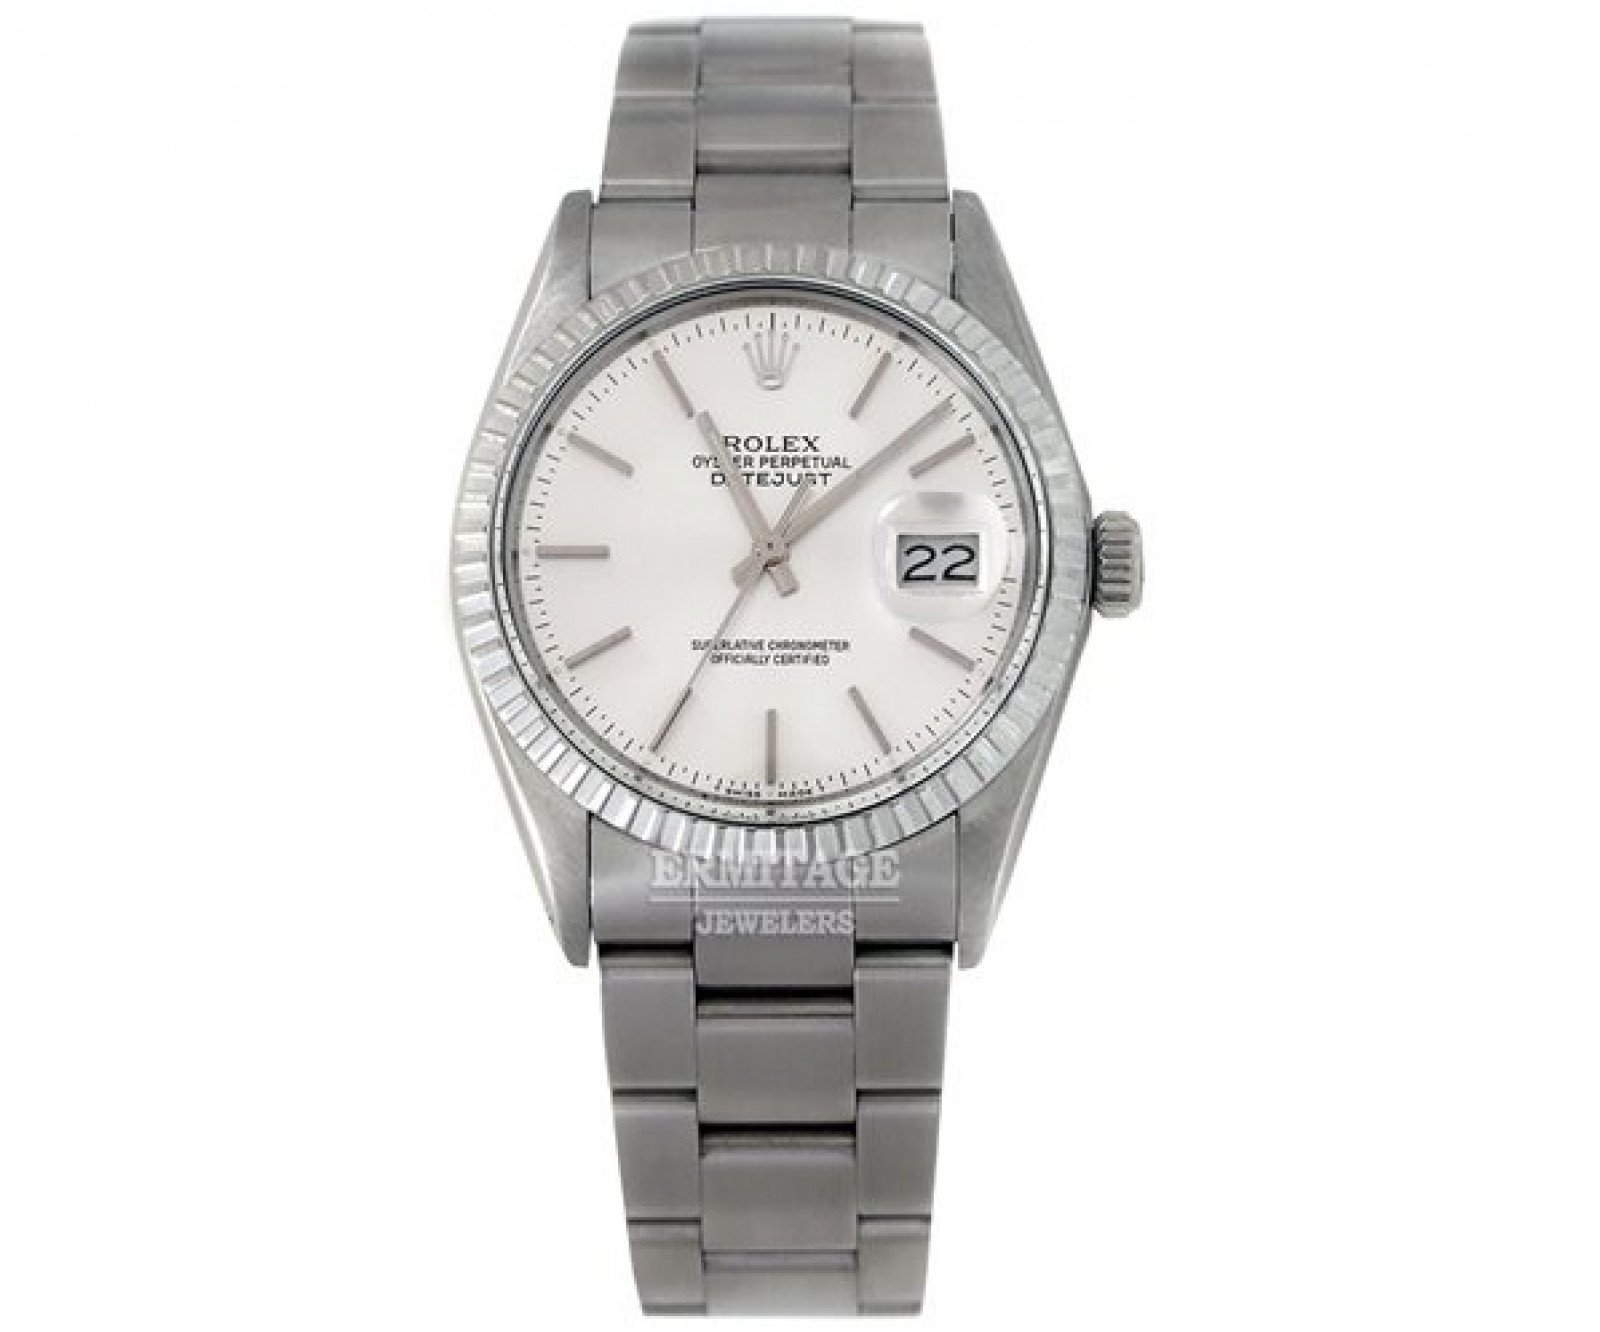 Men's Rolex Datejust 16030 with Oyster Bracelet | Ermitage Jewelers